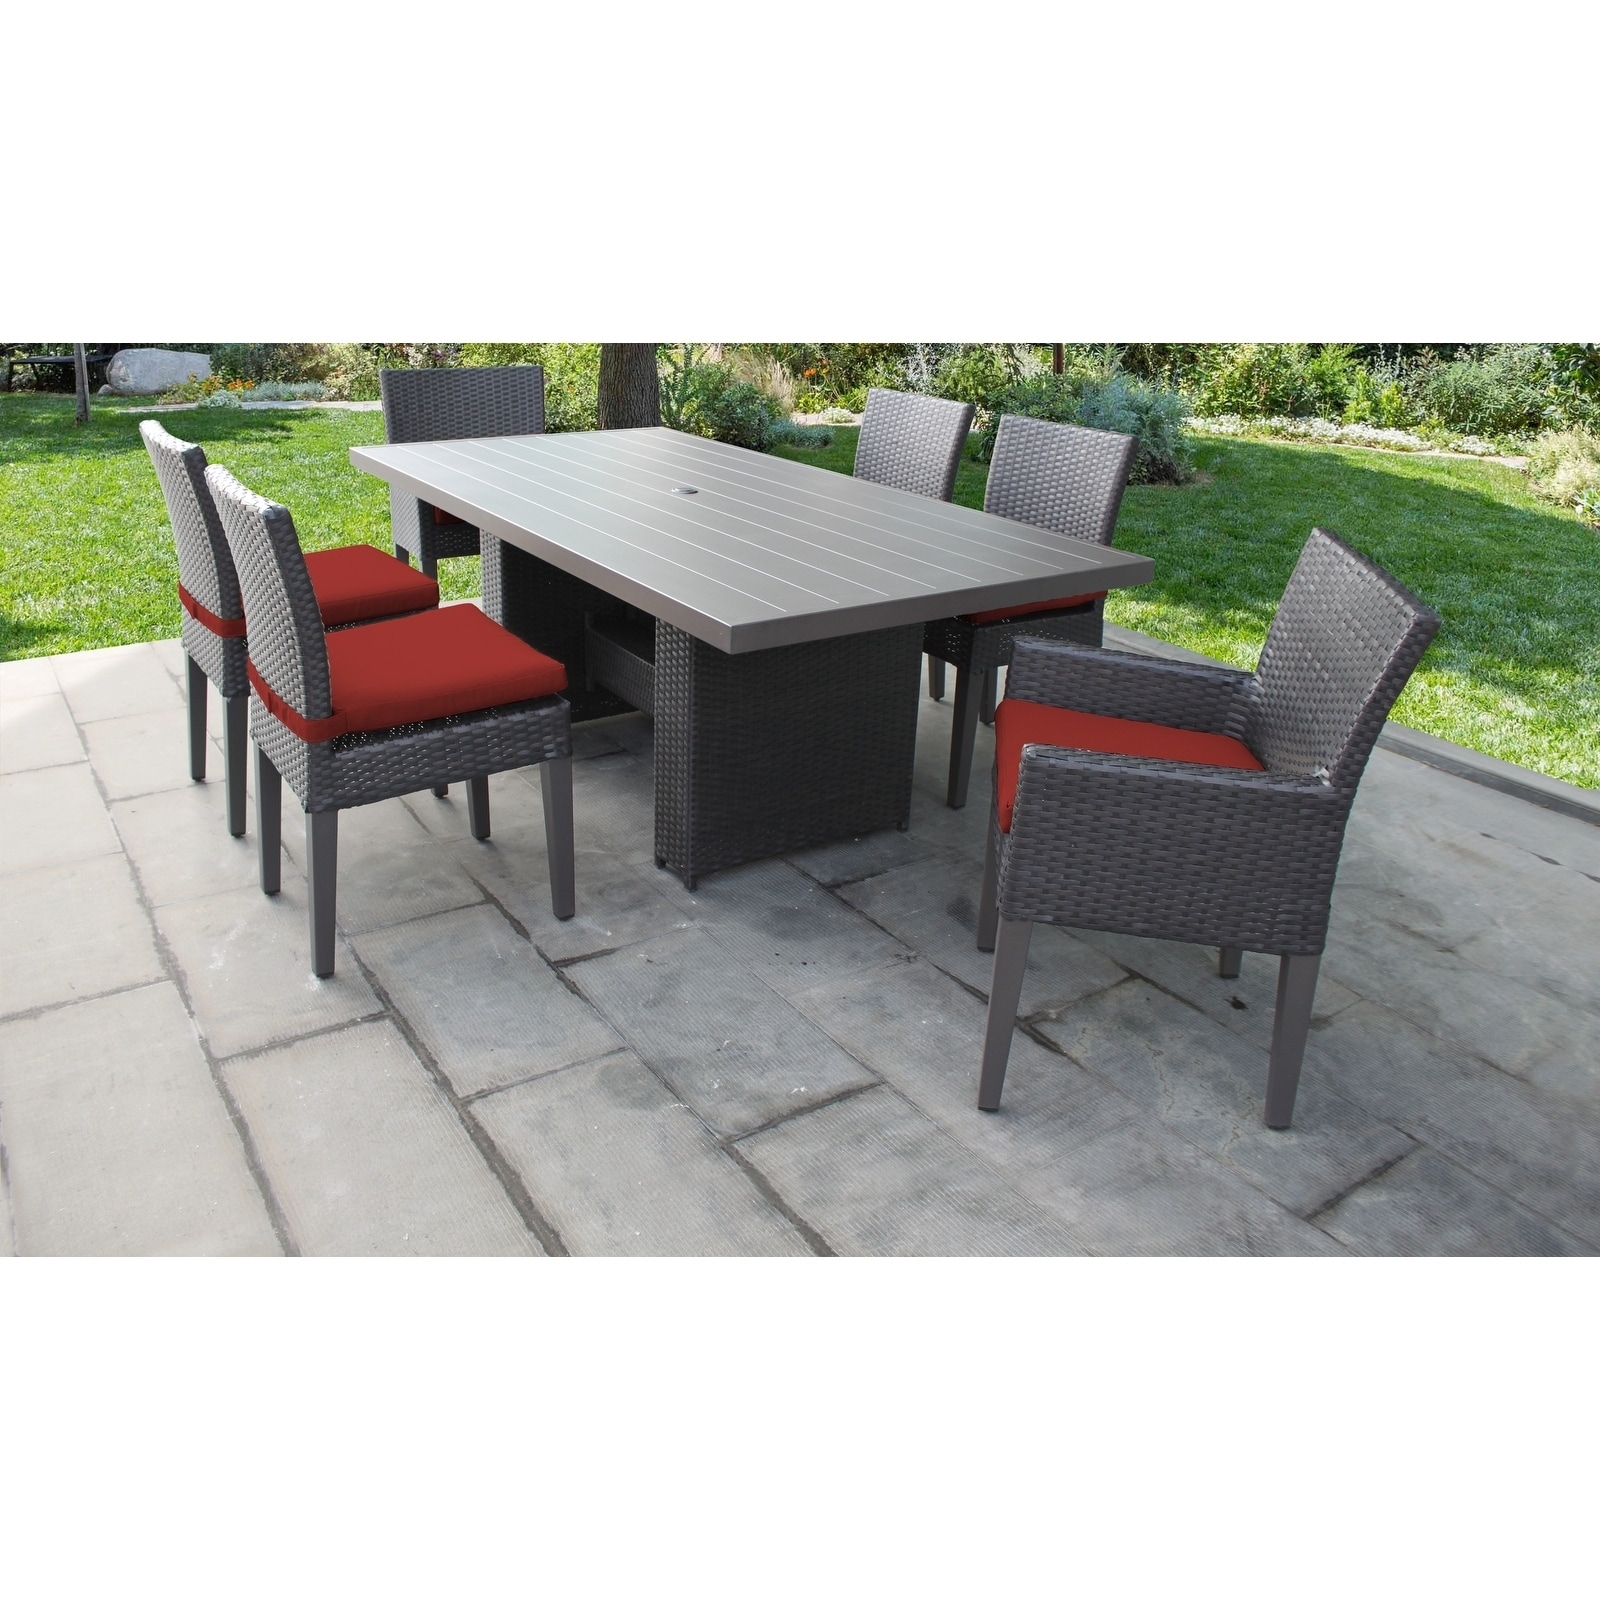 Barbados Rectangular Outdoor Patio Dining Table With 4 Armless Chairs And 2 Chairs W/ Arms